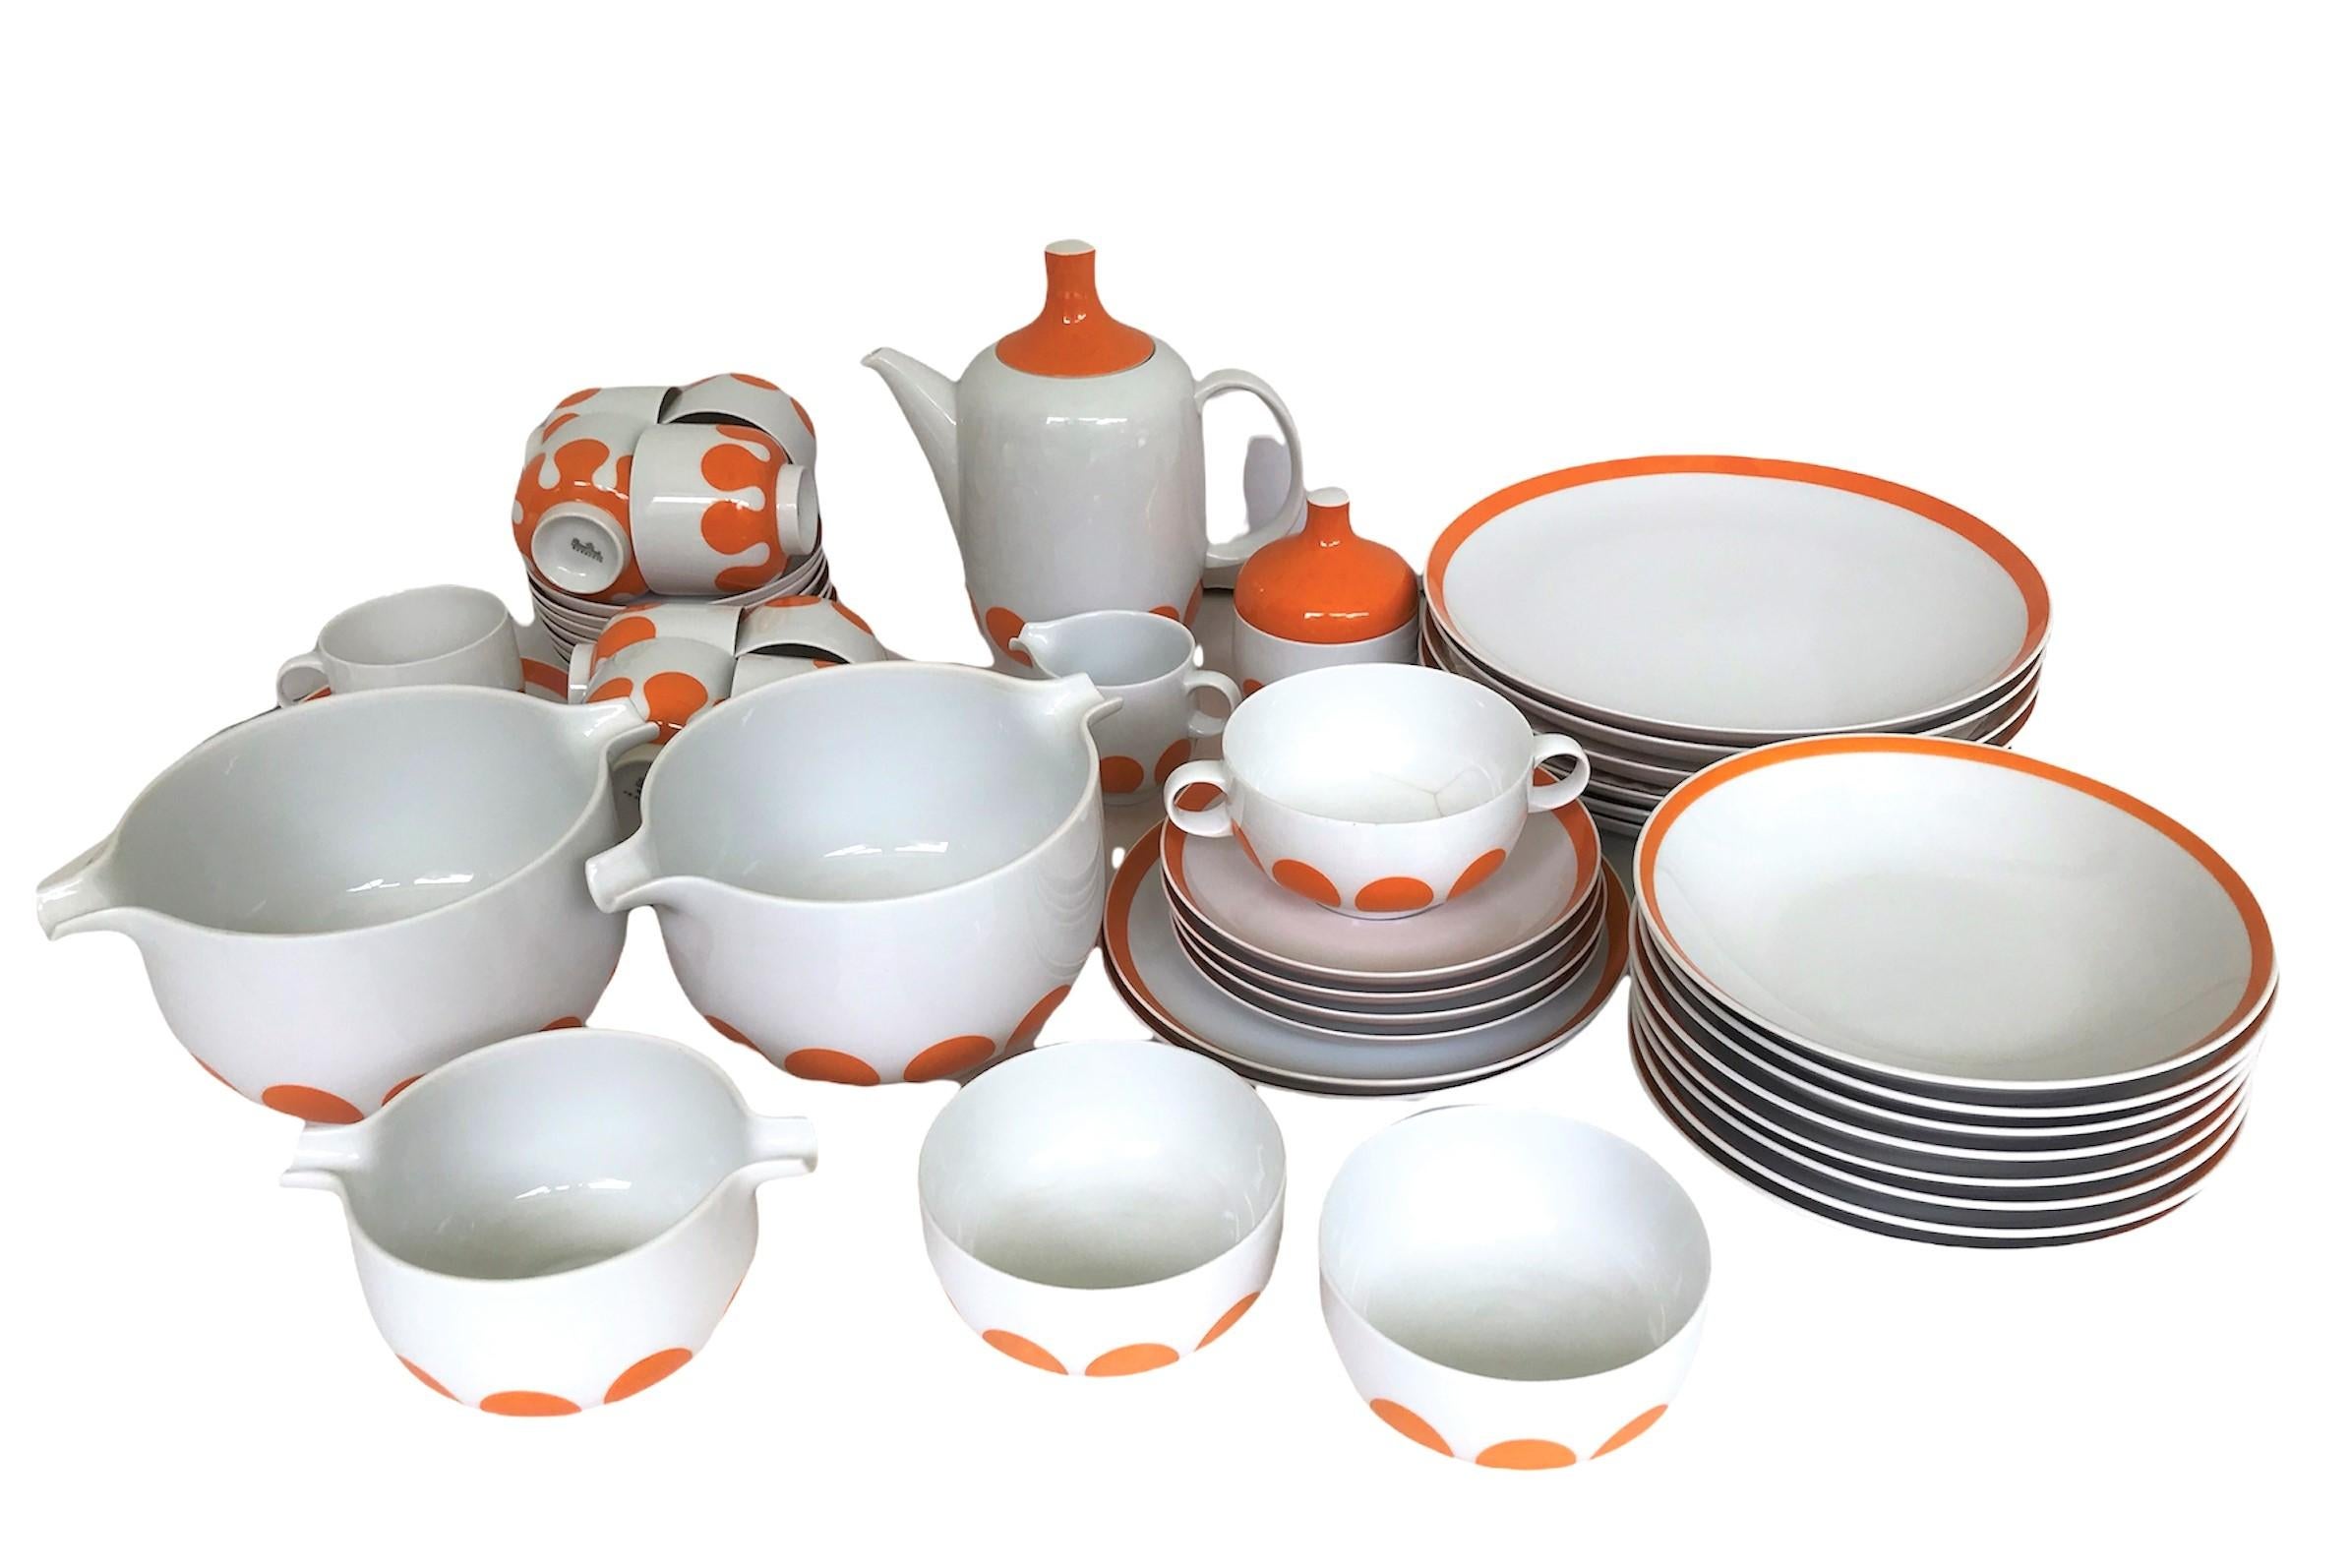 Wolf Karnagel was a free-lance designer for Rosenthal China, Germany, from 1969- 1973 and develop the shapes of the Plus Linie dinnerware pieces.  The decorative design was created by Rosemonde Nairac. The Mondial Plus line was produced from 1973-